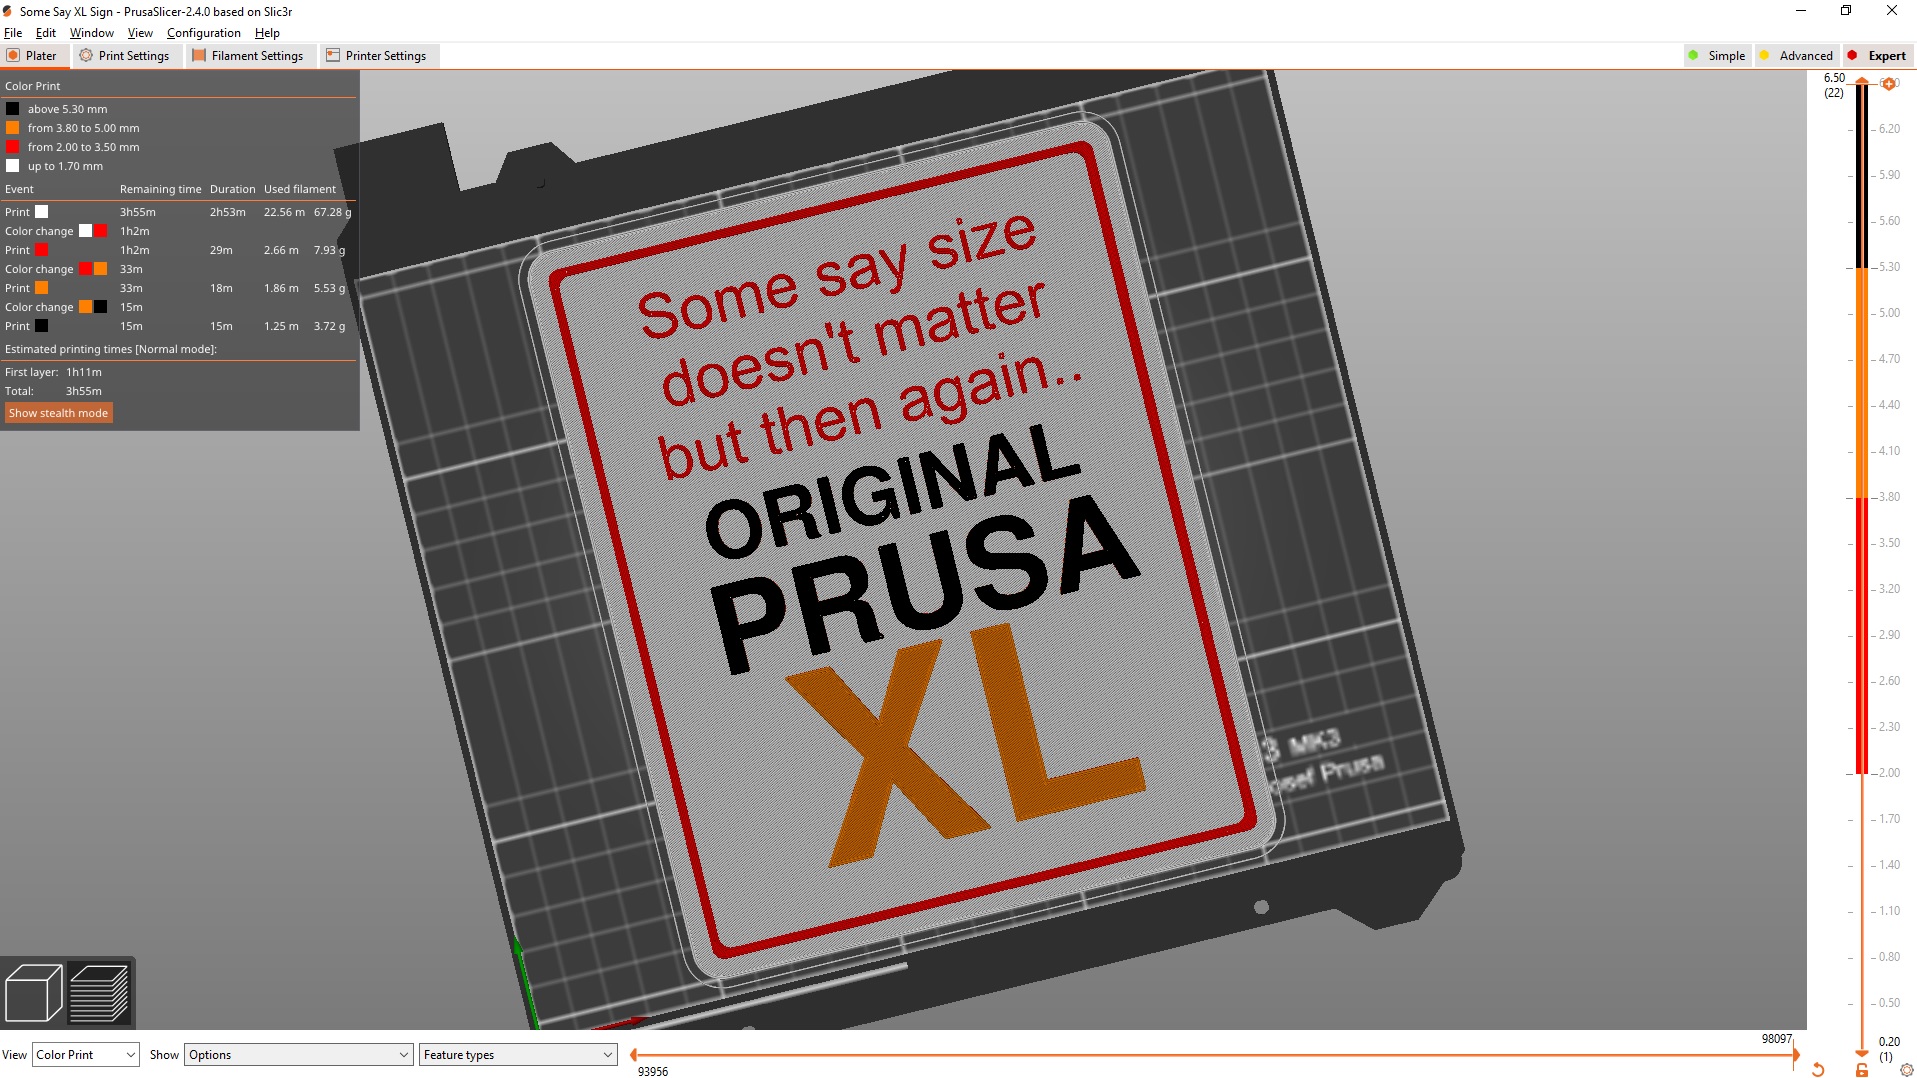 Some say size doesn't matter - Prusa XL